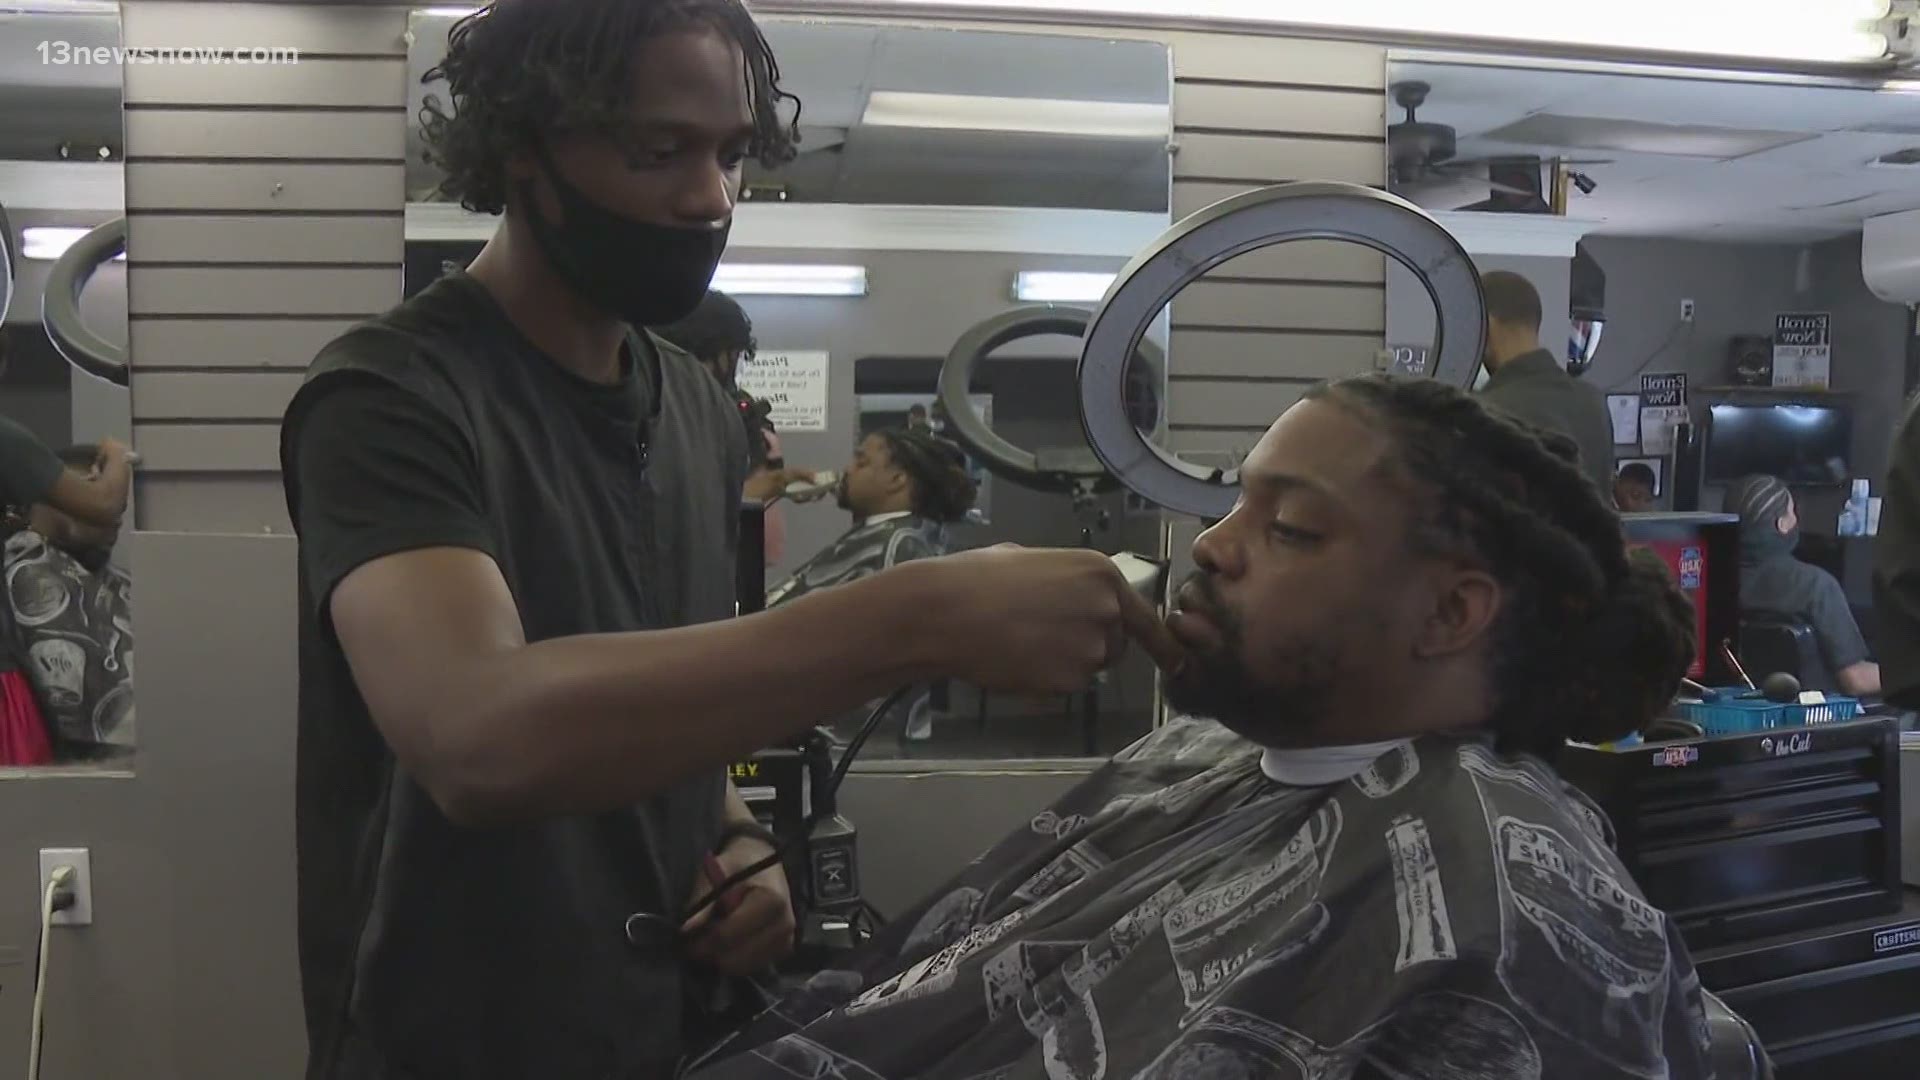 A White House initiative wants barber shops and salons (places where employees have the ear of their clients) to help encourage people to get the shot.